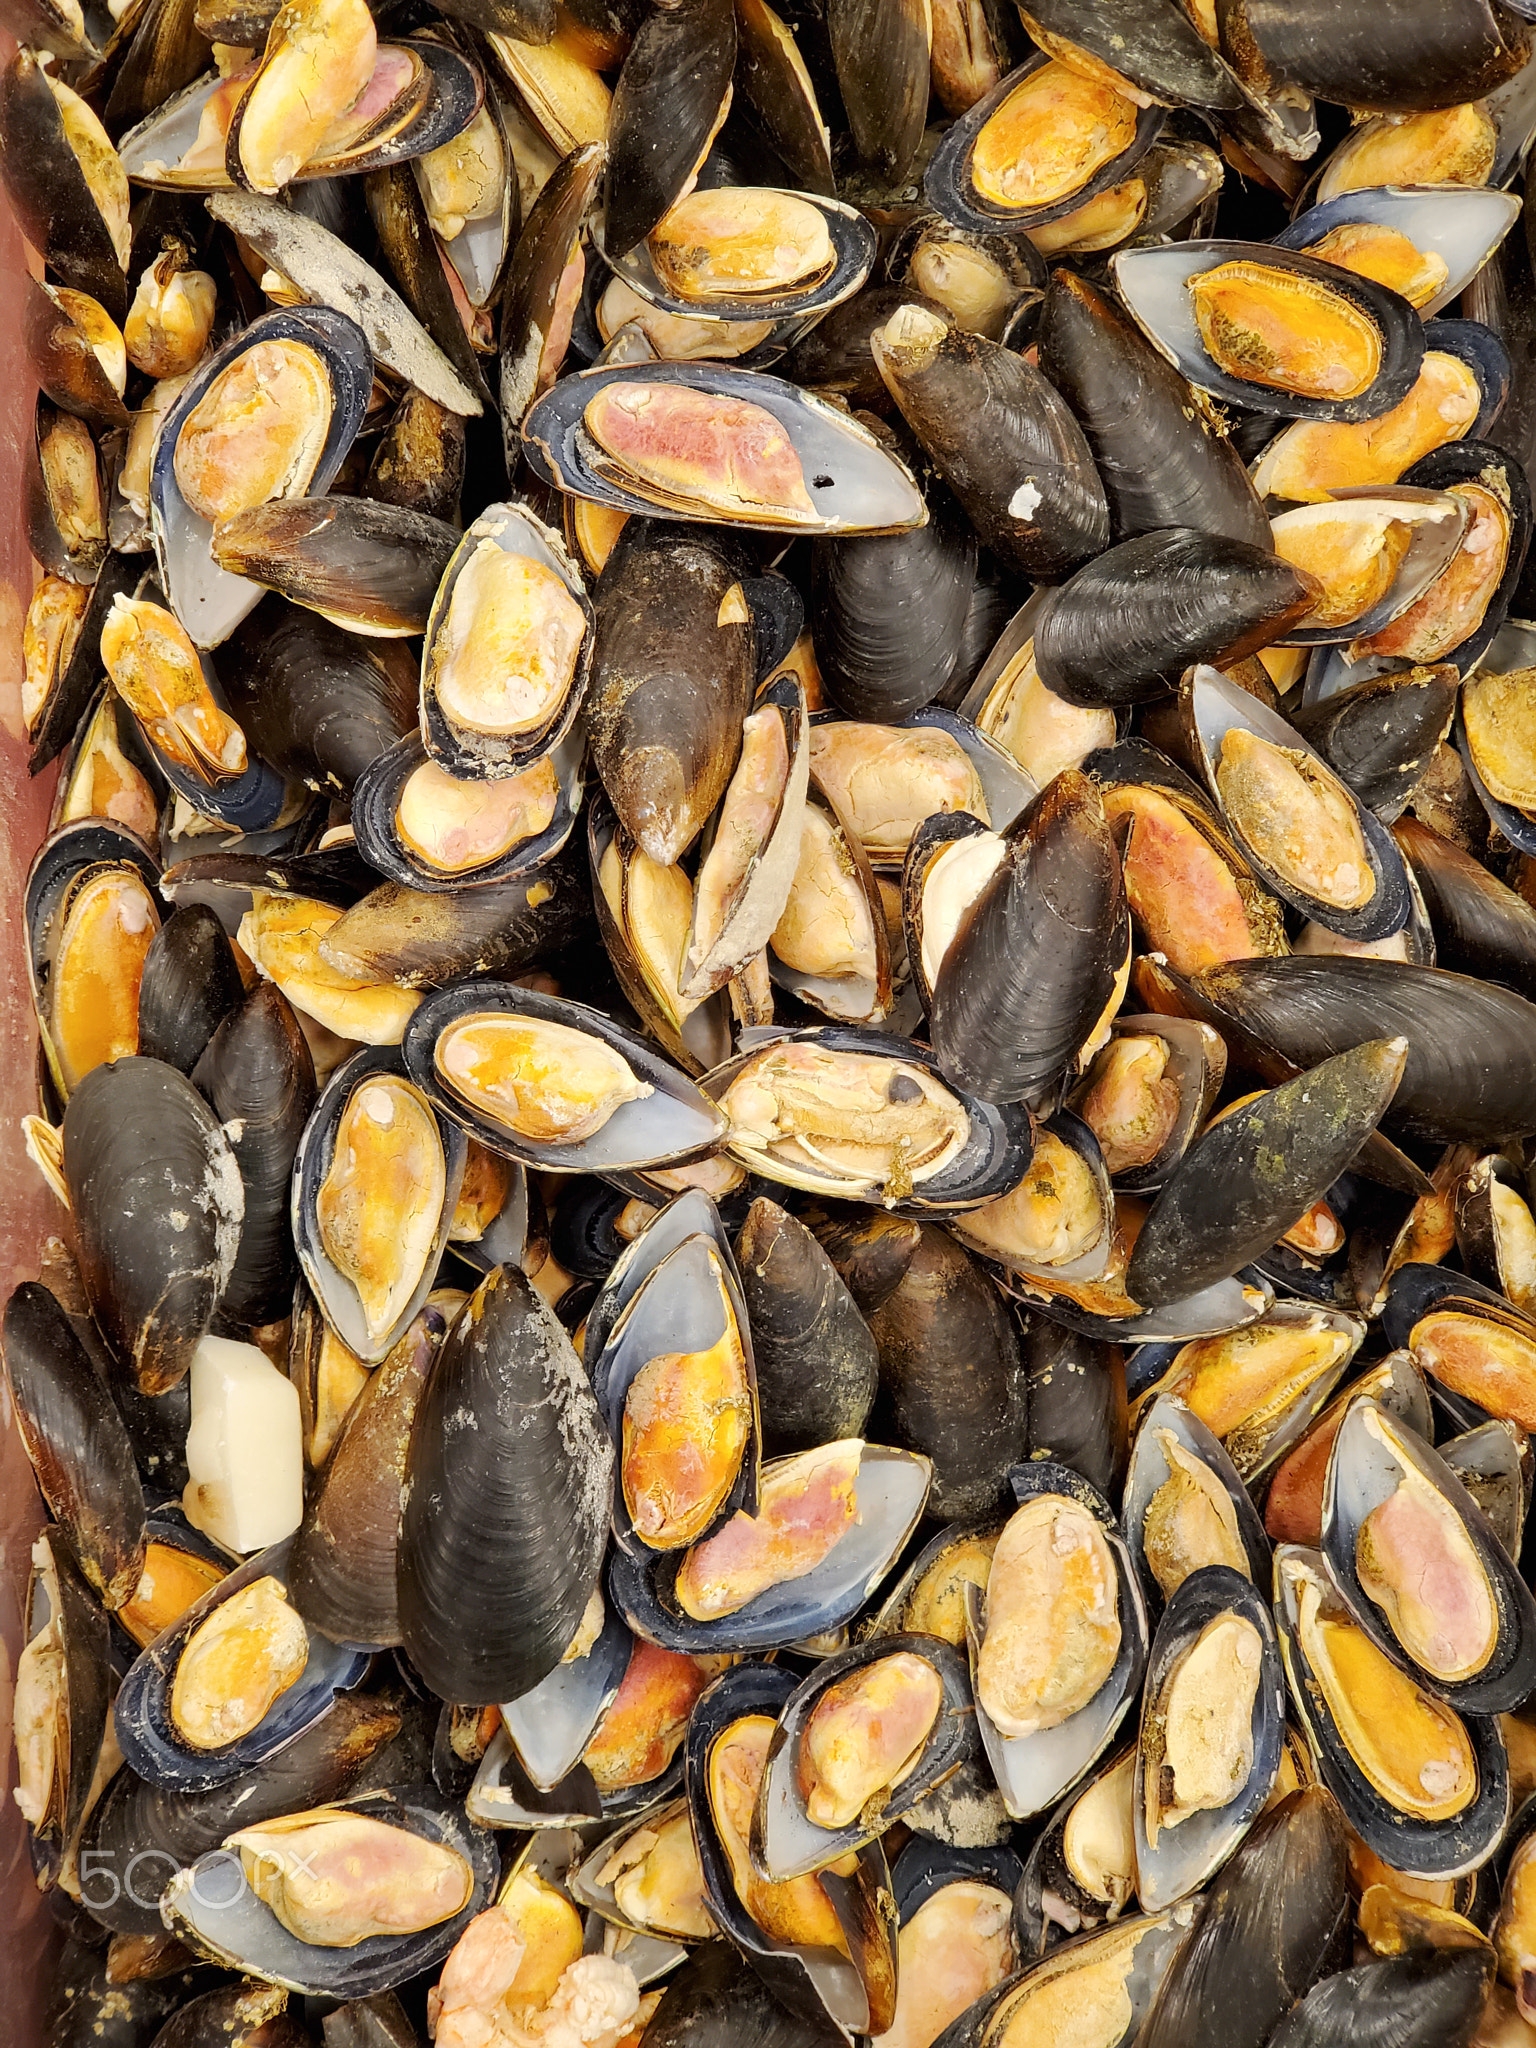 frozen mussels close-up. food texture background. Seafood